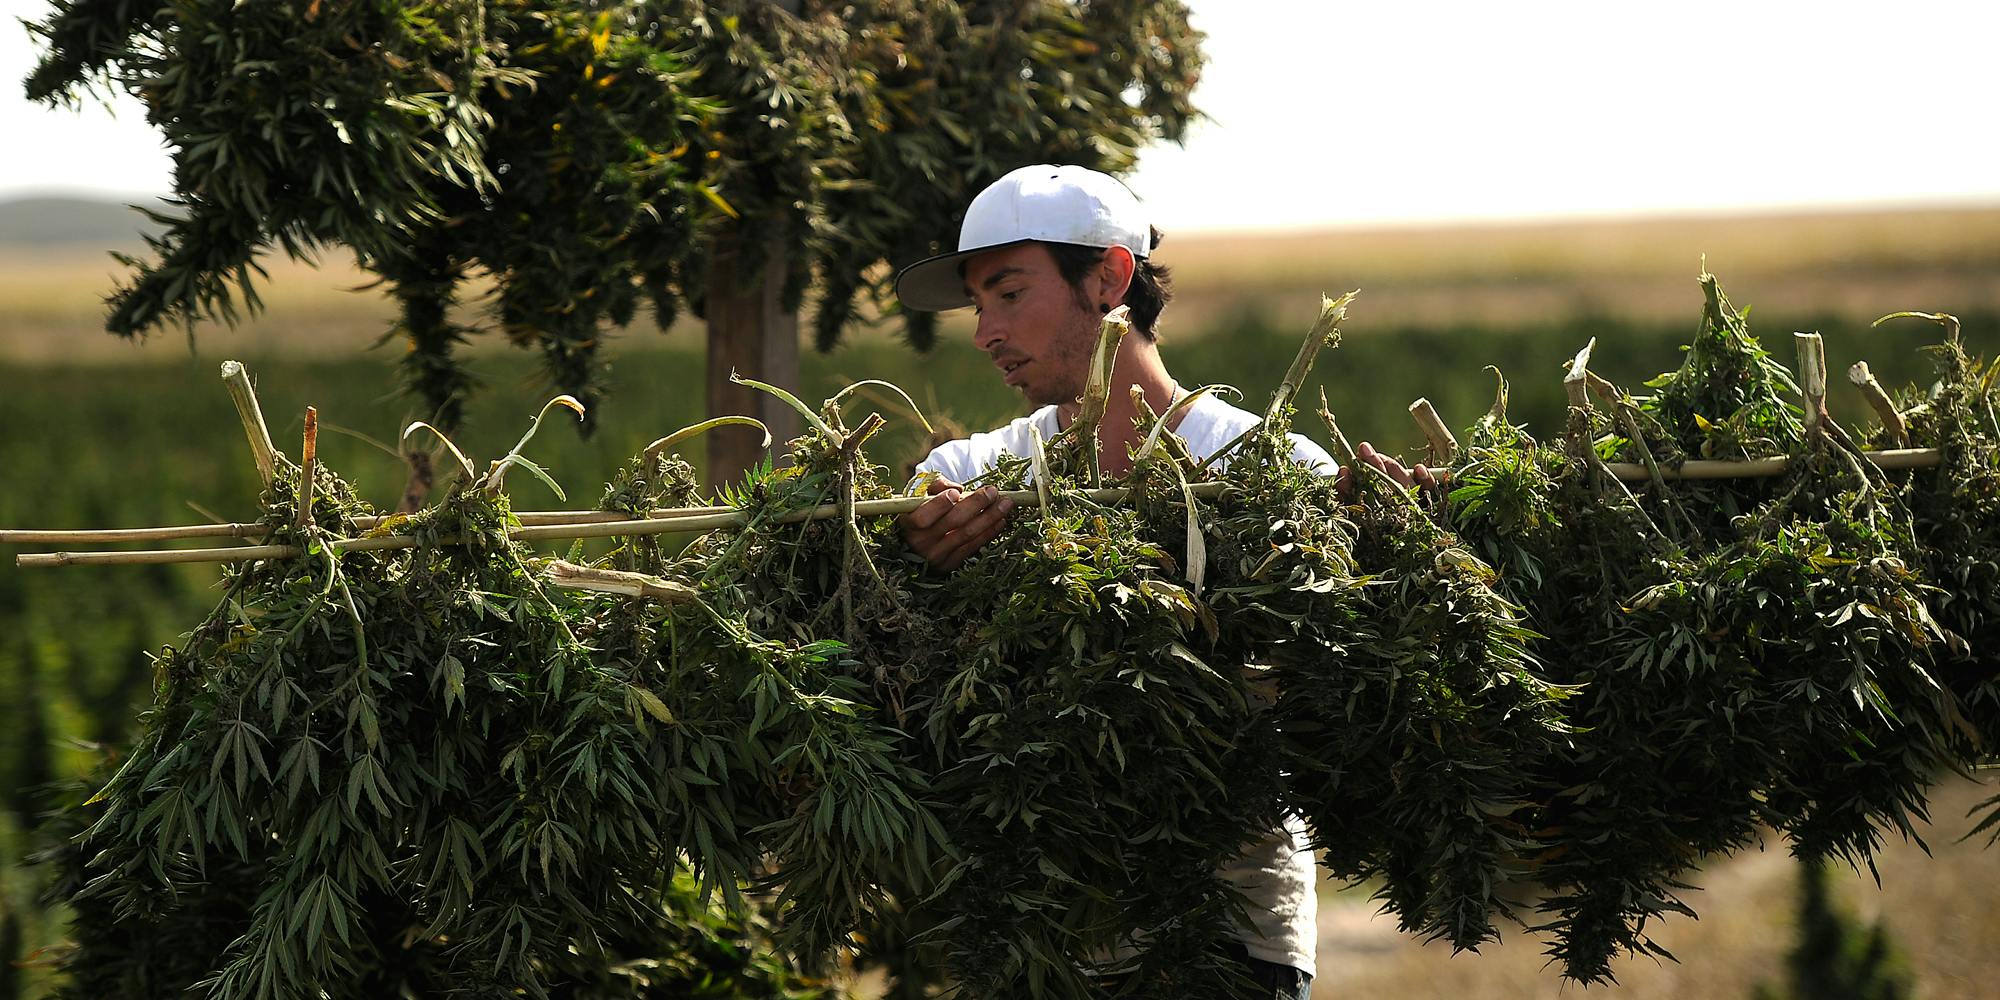 A Government Reports Finds There Are Health Risks To Cannabis Cultivation